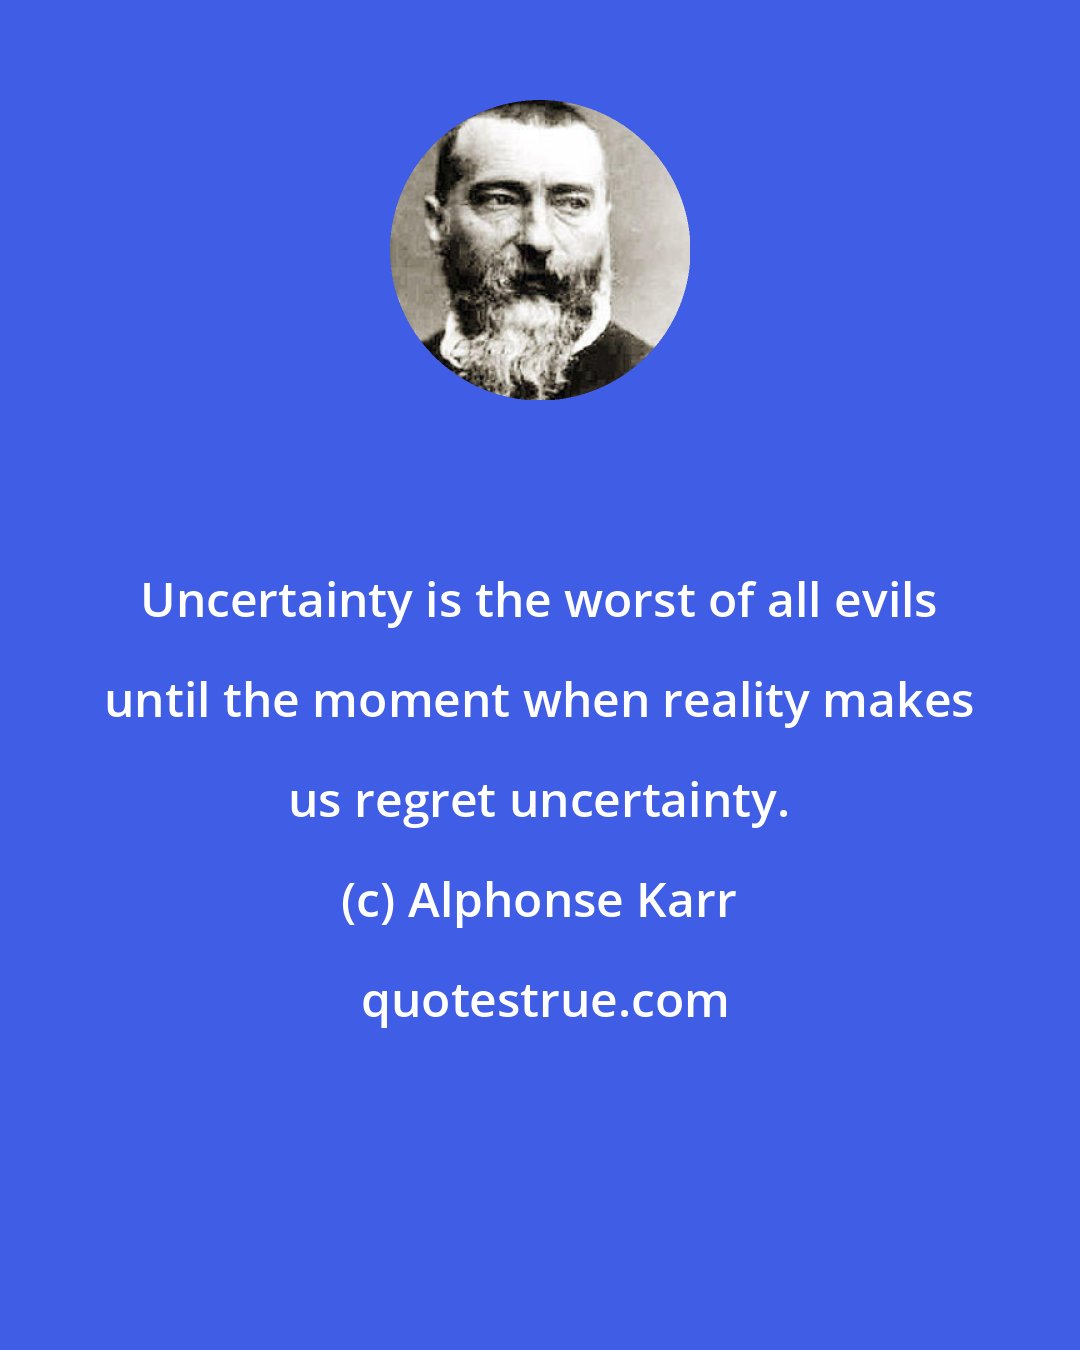 Alphonse Karr: Uncertainty is the worst of all evils until the moment when reality makes us regret uncertainty.